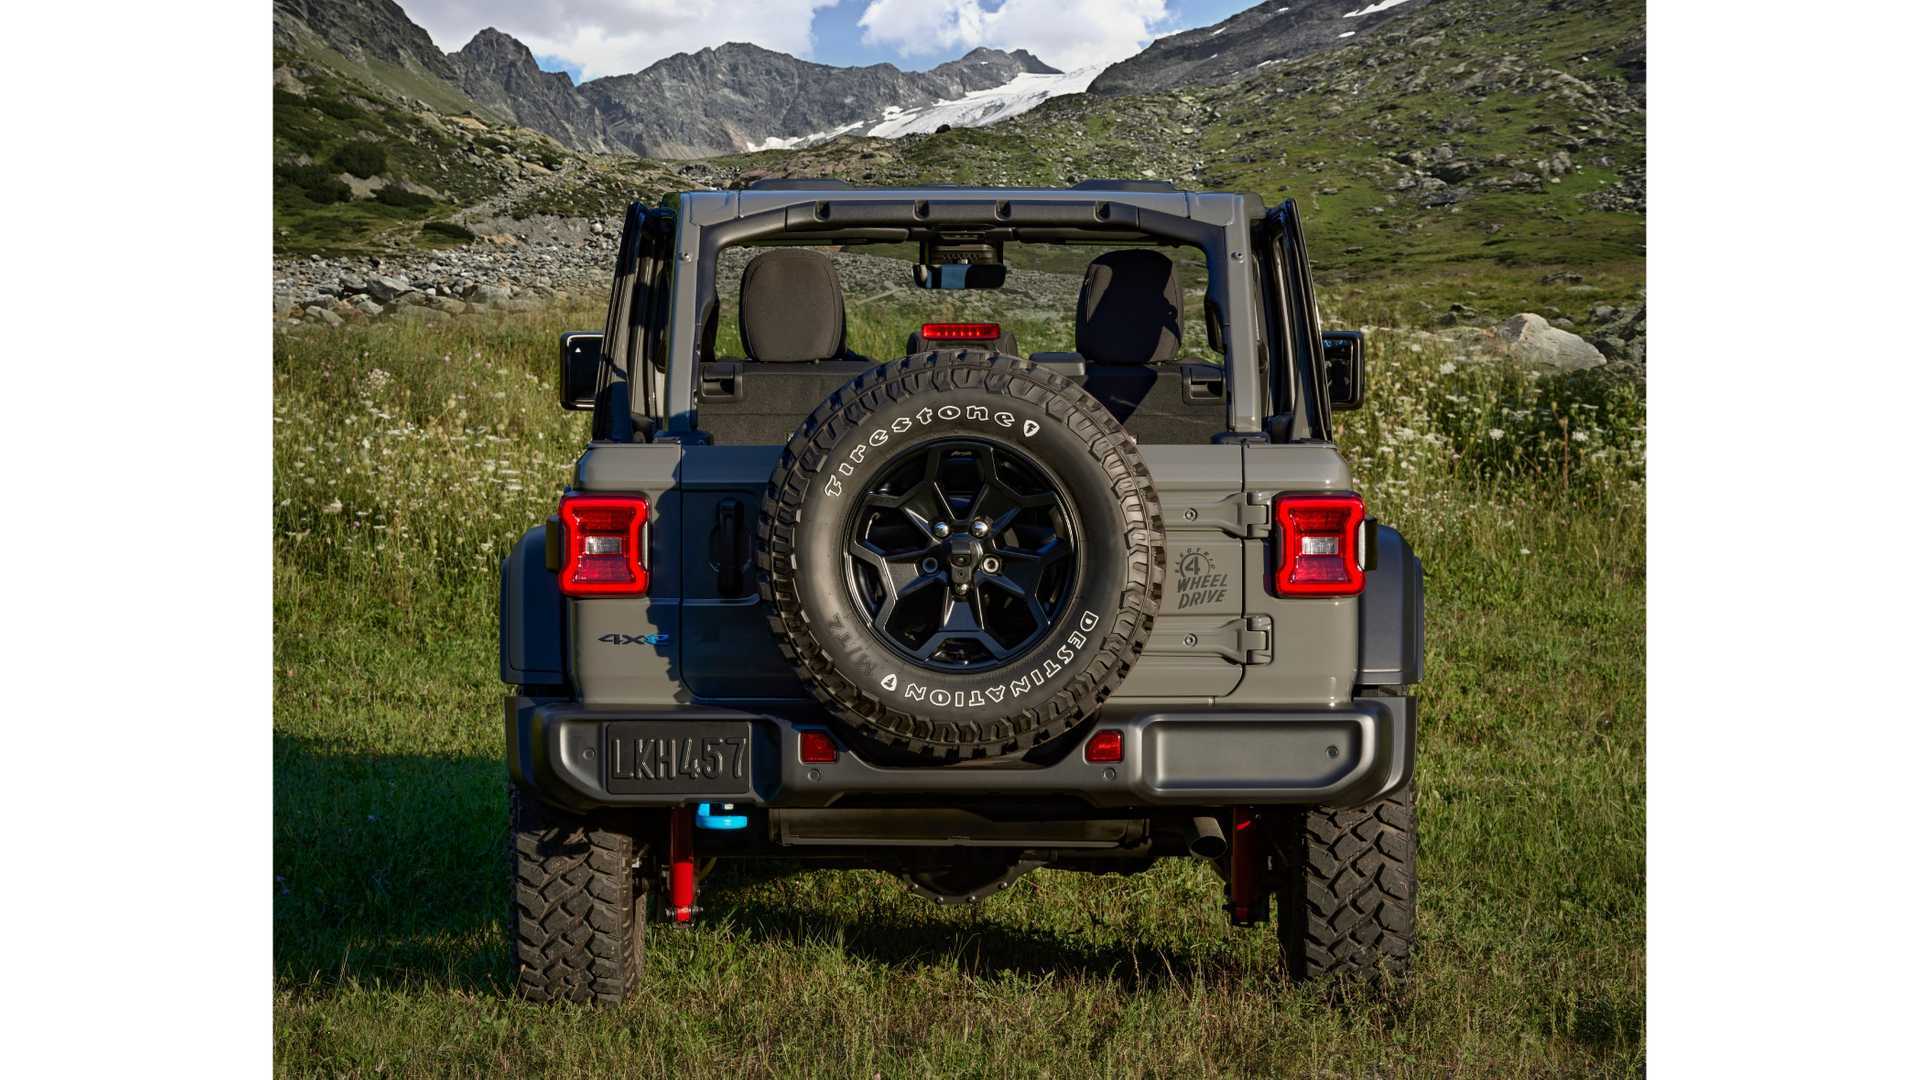 jeep wrangler 4xe plug-in hybrid recalled due to battery fire risk